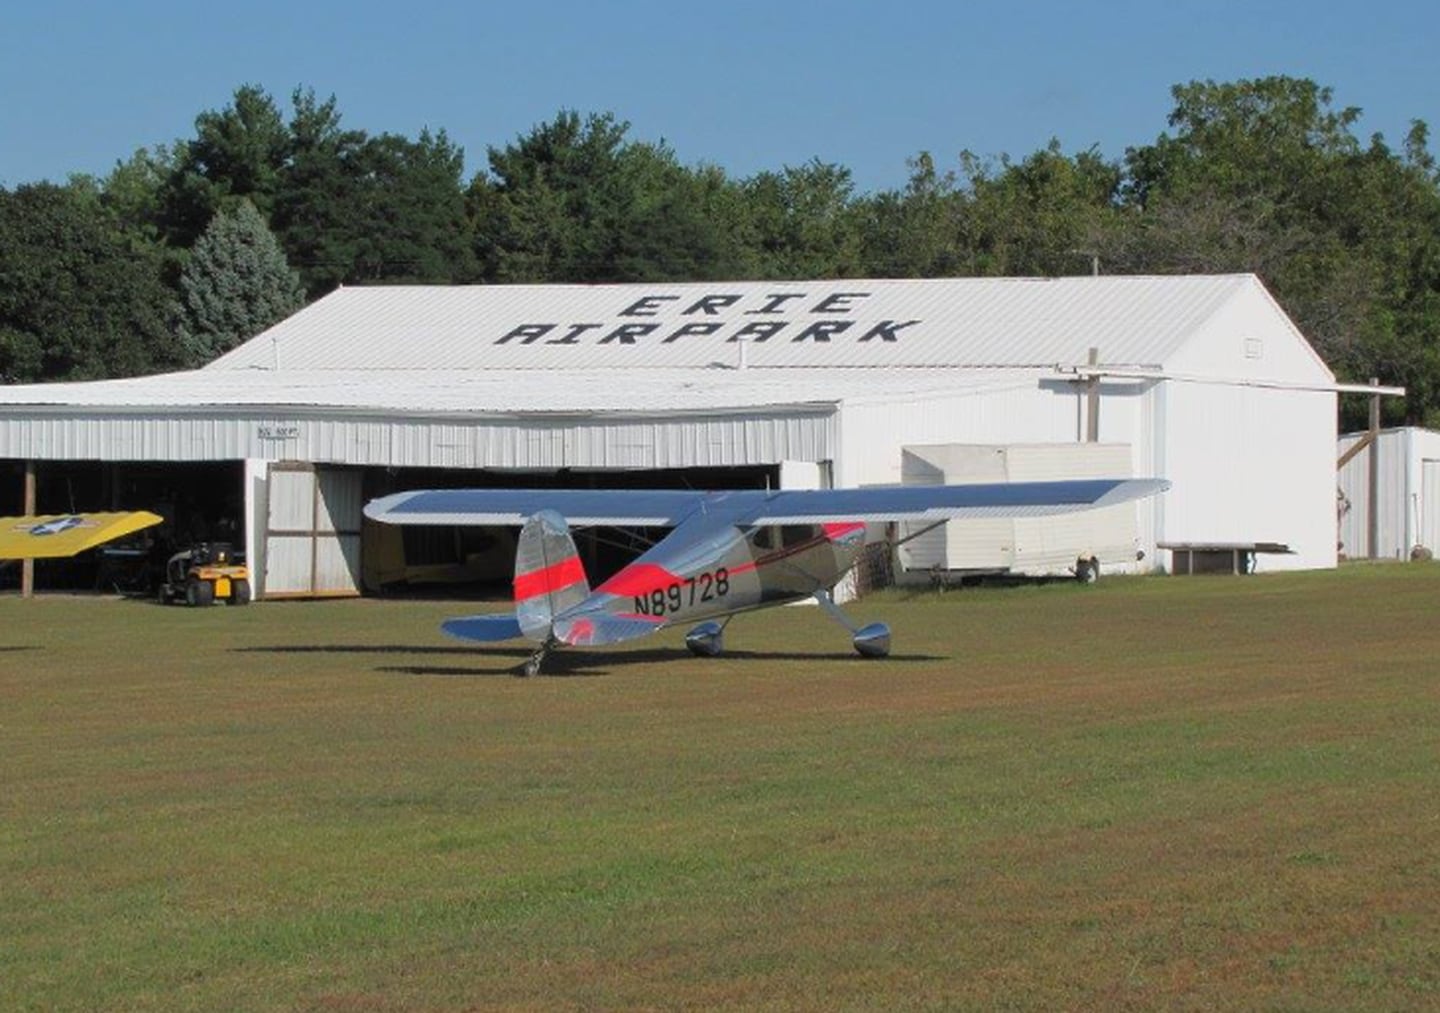 Erie Airpark, 8689 Star Road, is the 2022 Private Airport of the Year. Since 1999, it’s been owned by Jim and Sue Robinson, and it is the home base for the Illowa Sport Flyers Club.